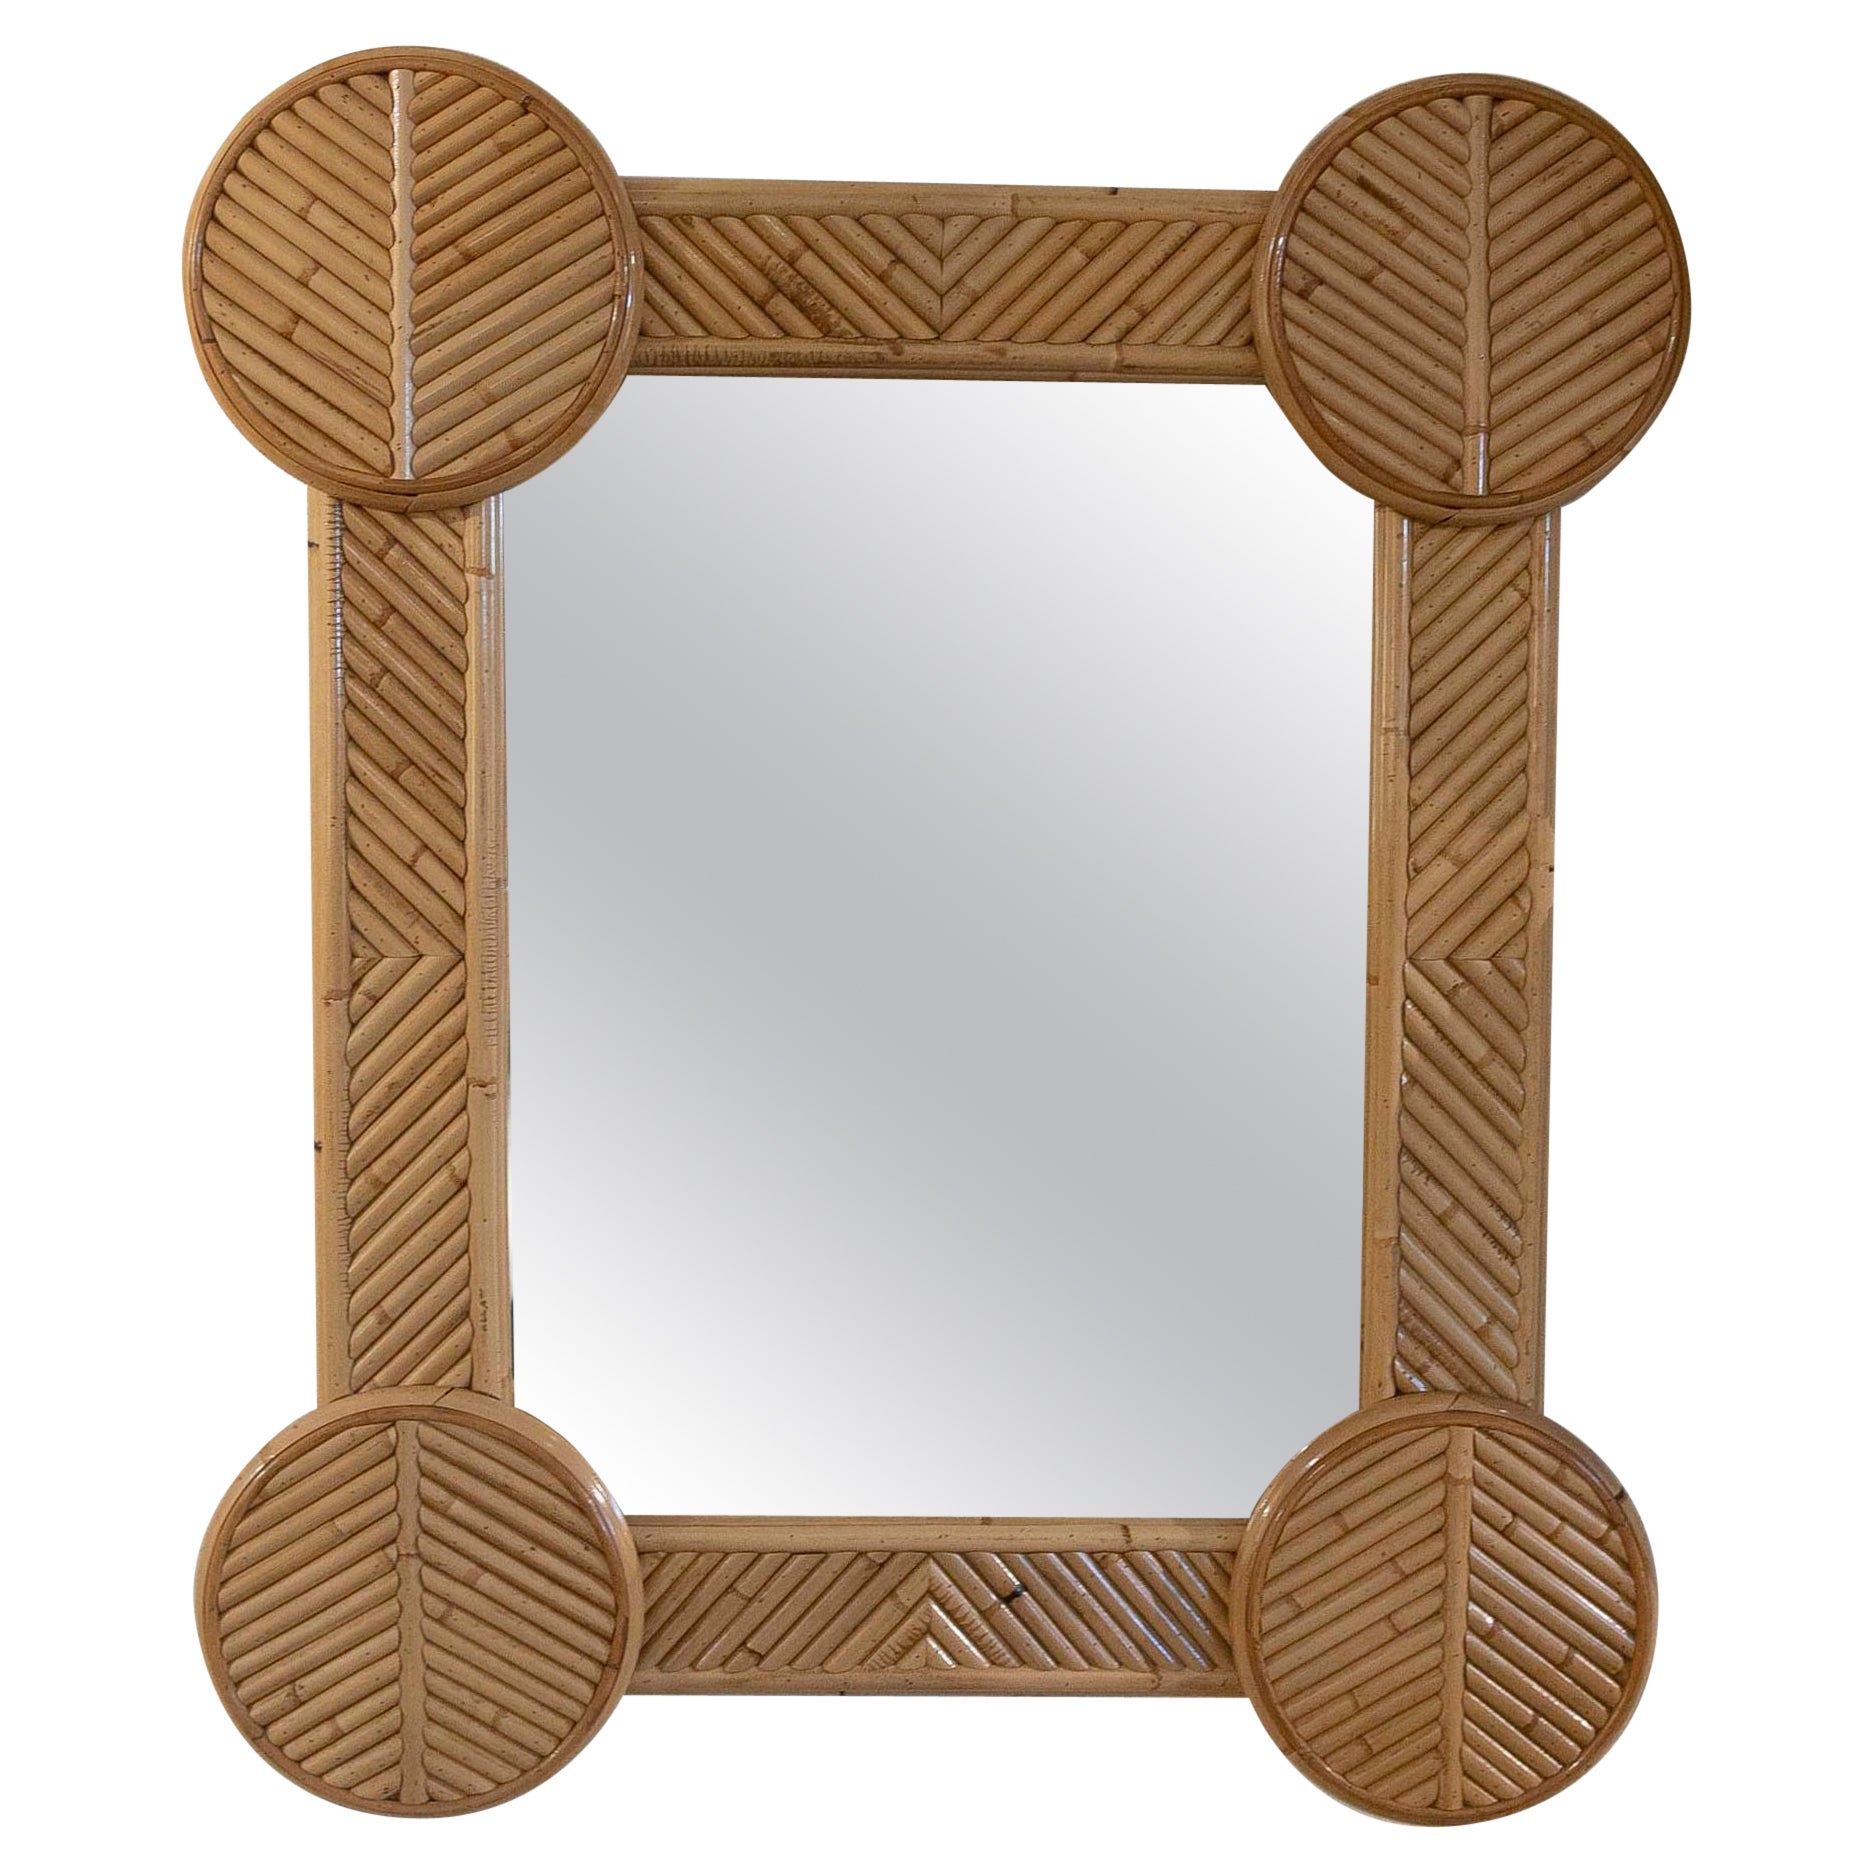 1970s Bamboo Wall Mirror with Rounded Corners